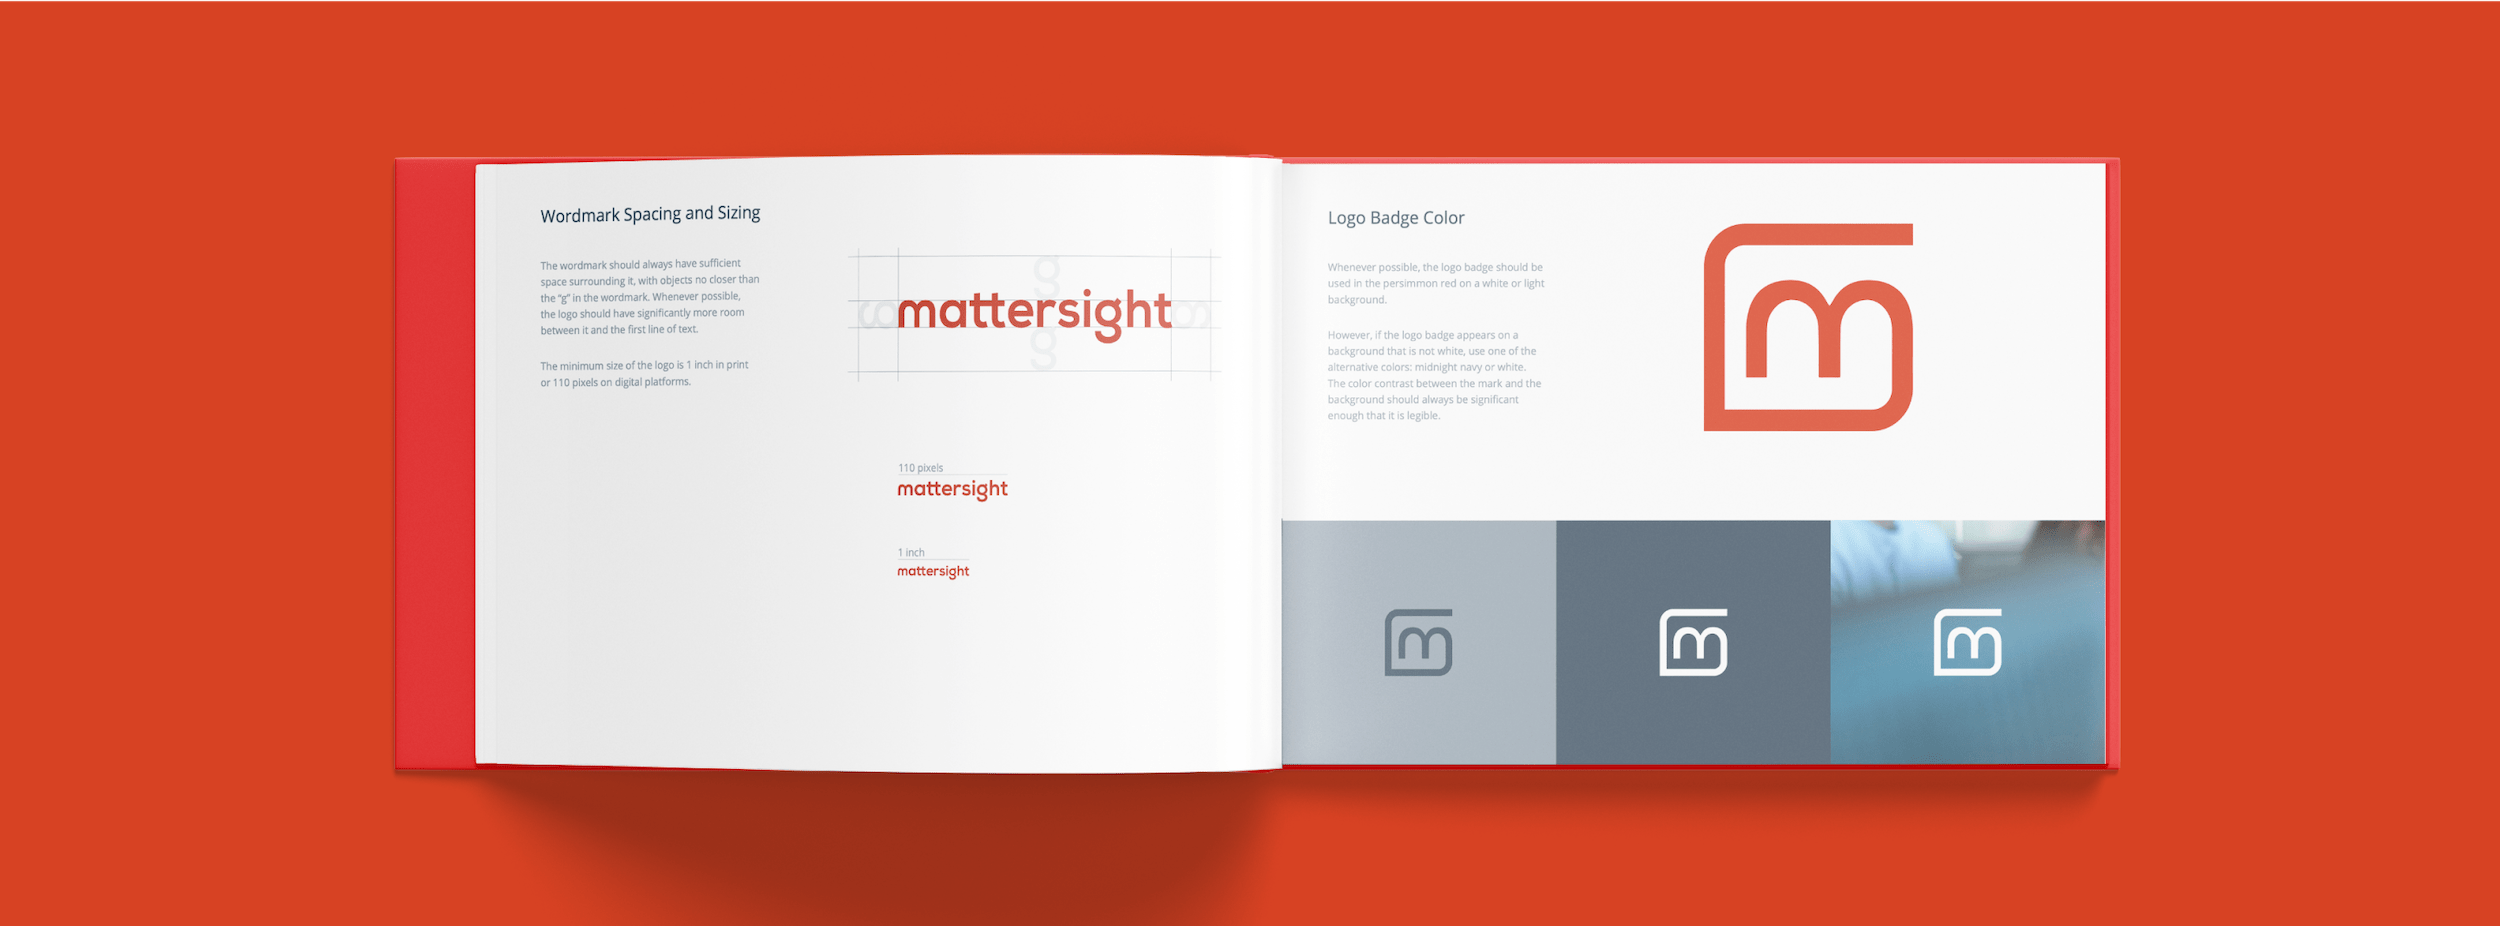 the mattersight brand guidelines open to pages titled "wordmark spacing and sizing" and "logo badge color"